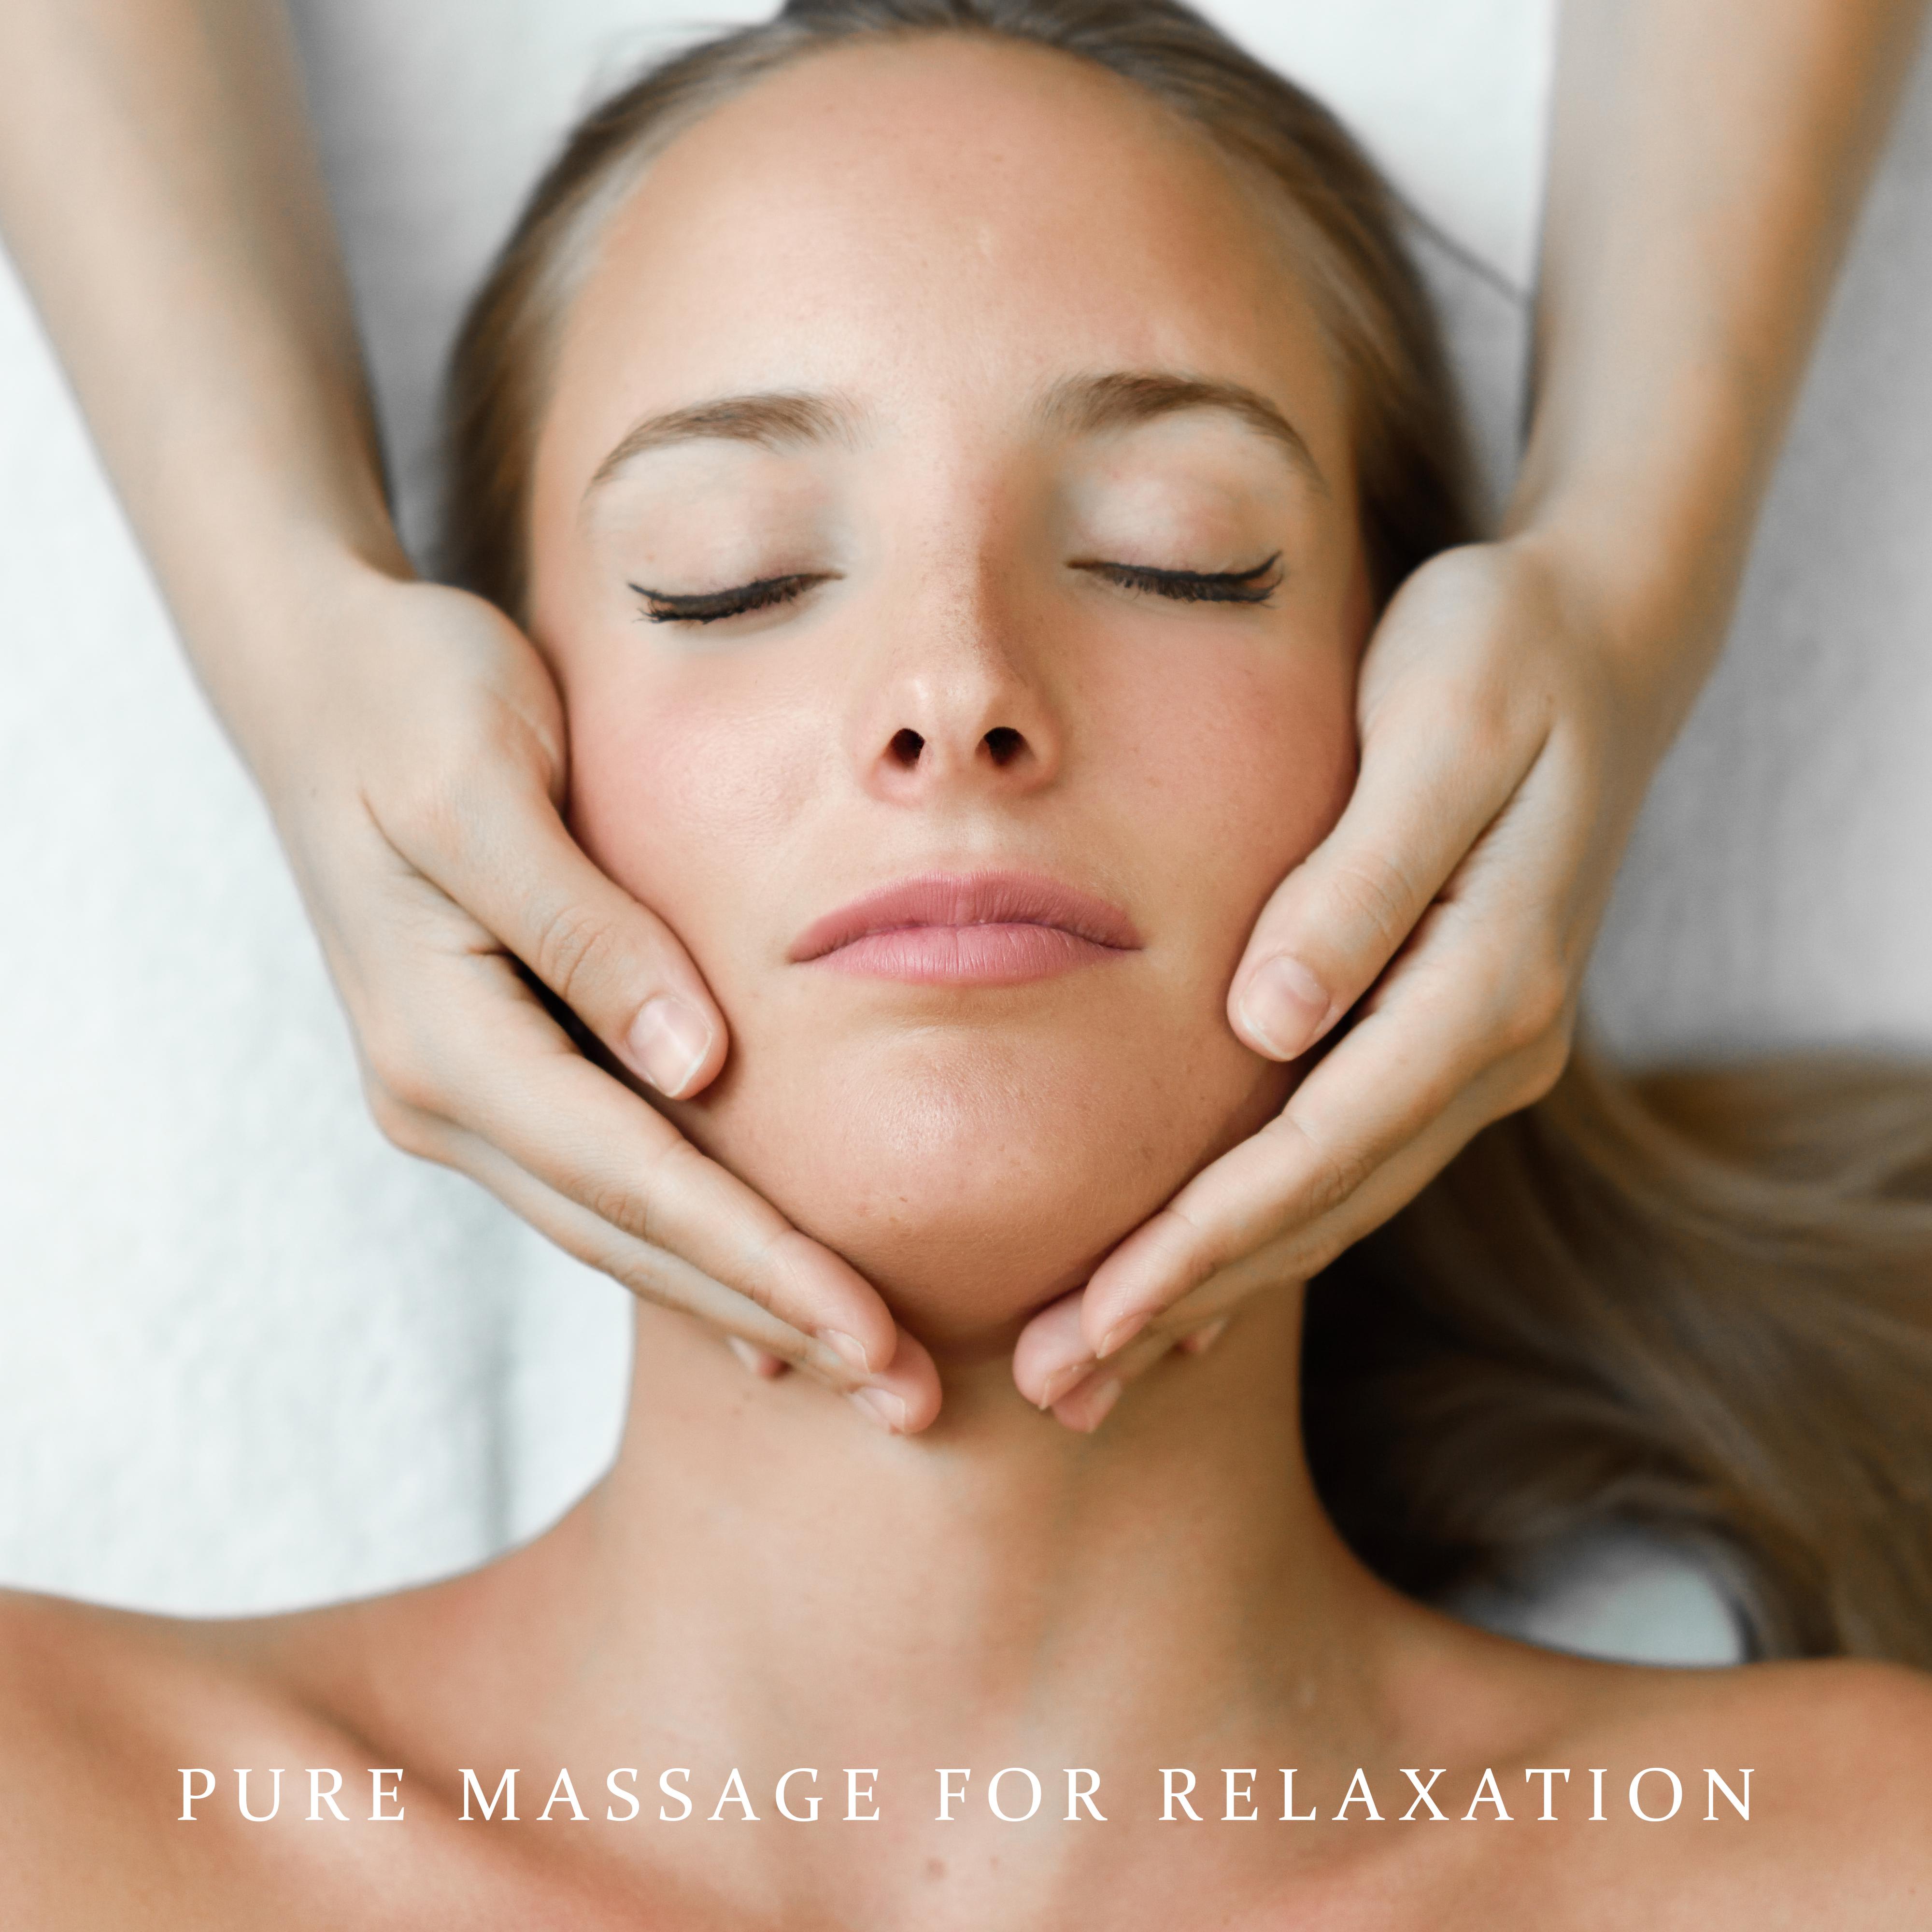 Pure Massage for Relaxation